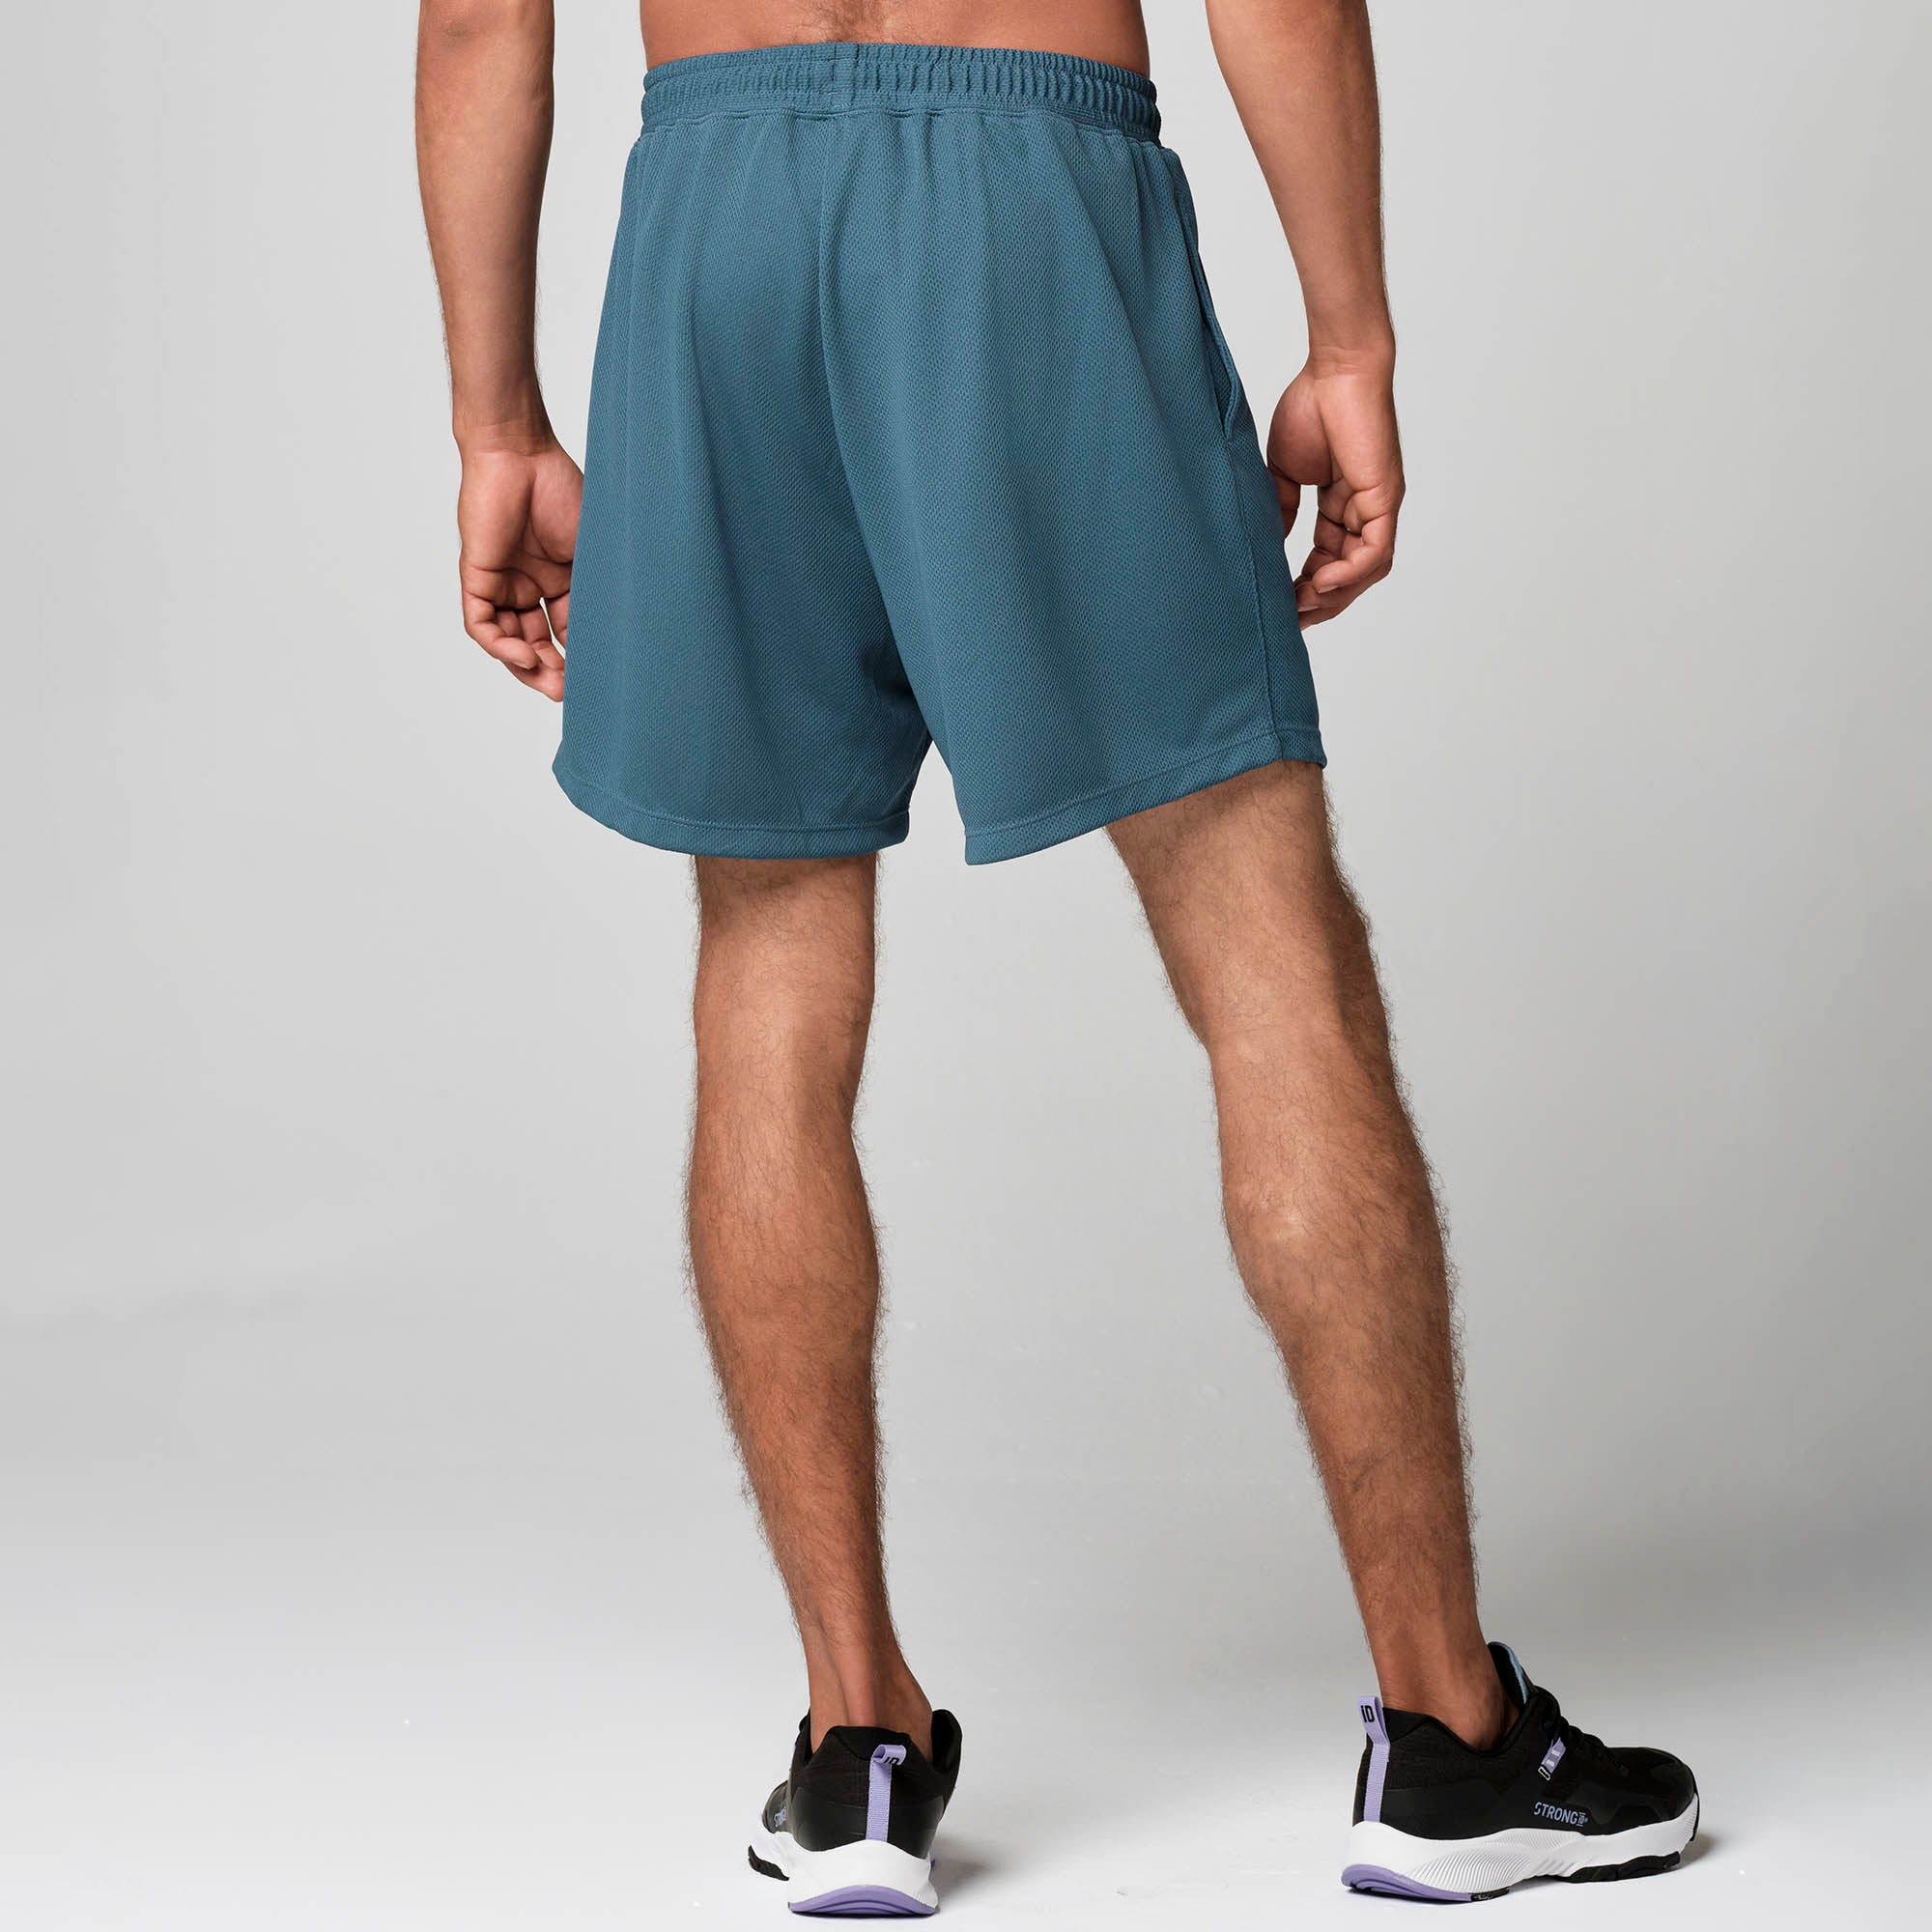 Bring Your Power Mesh Shorts (Special Order)